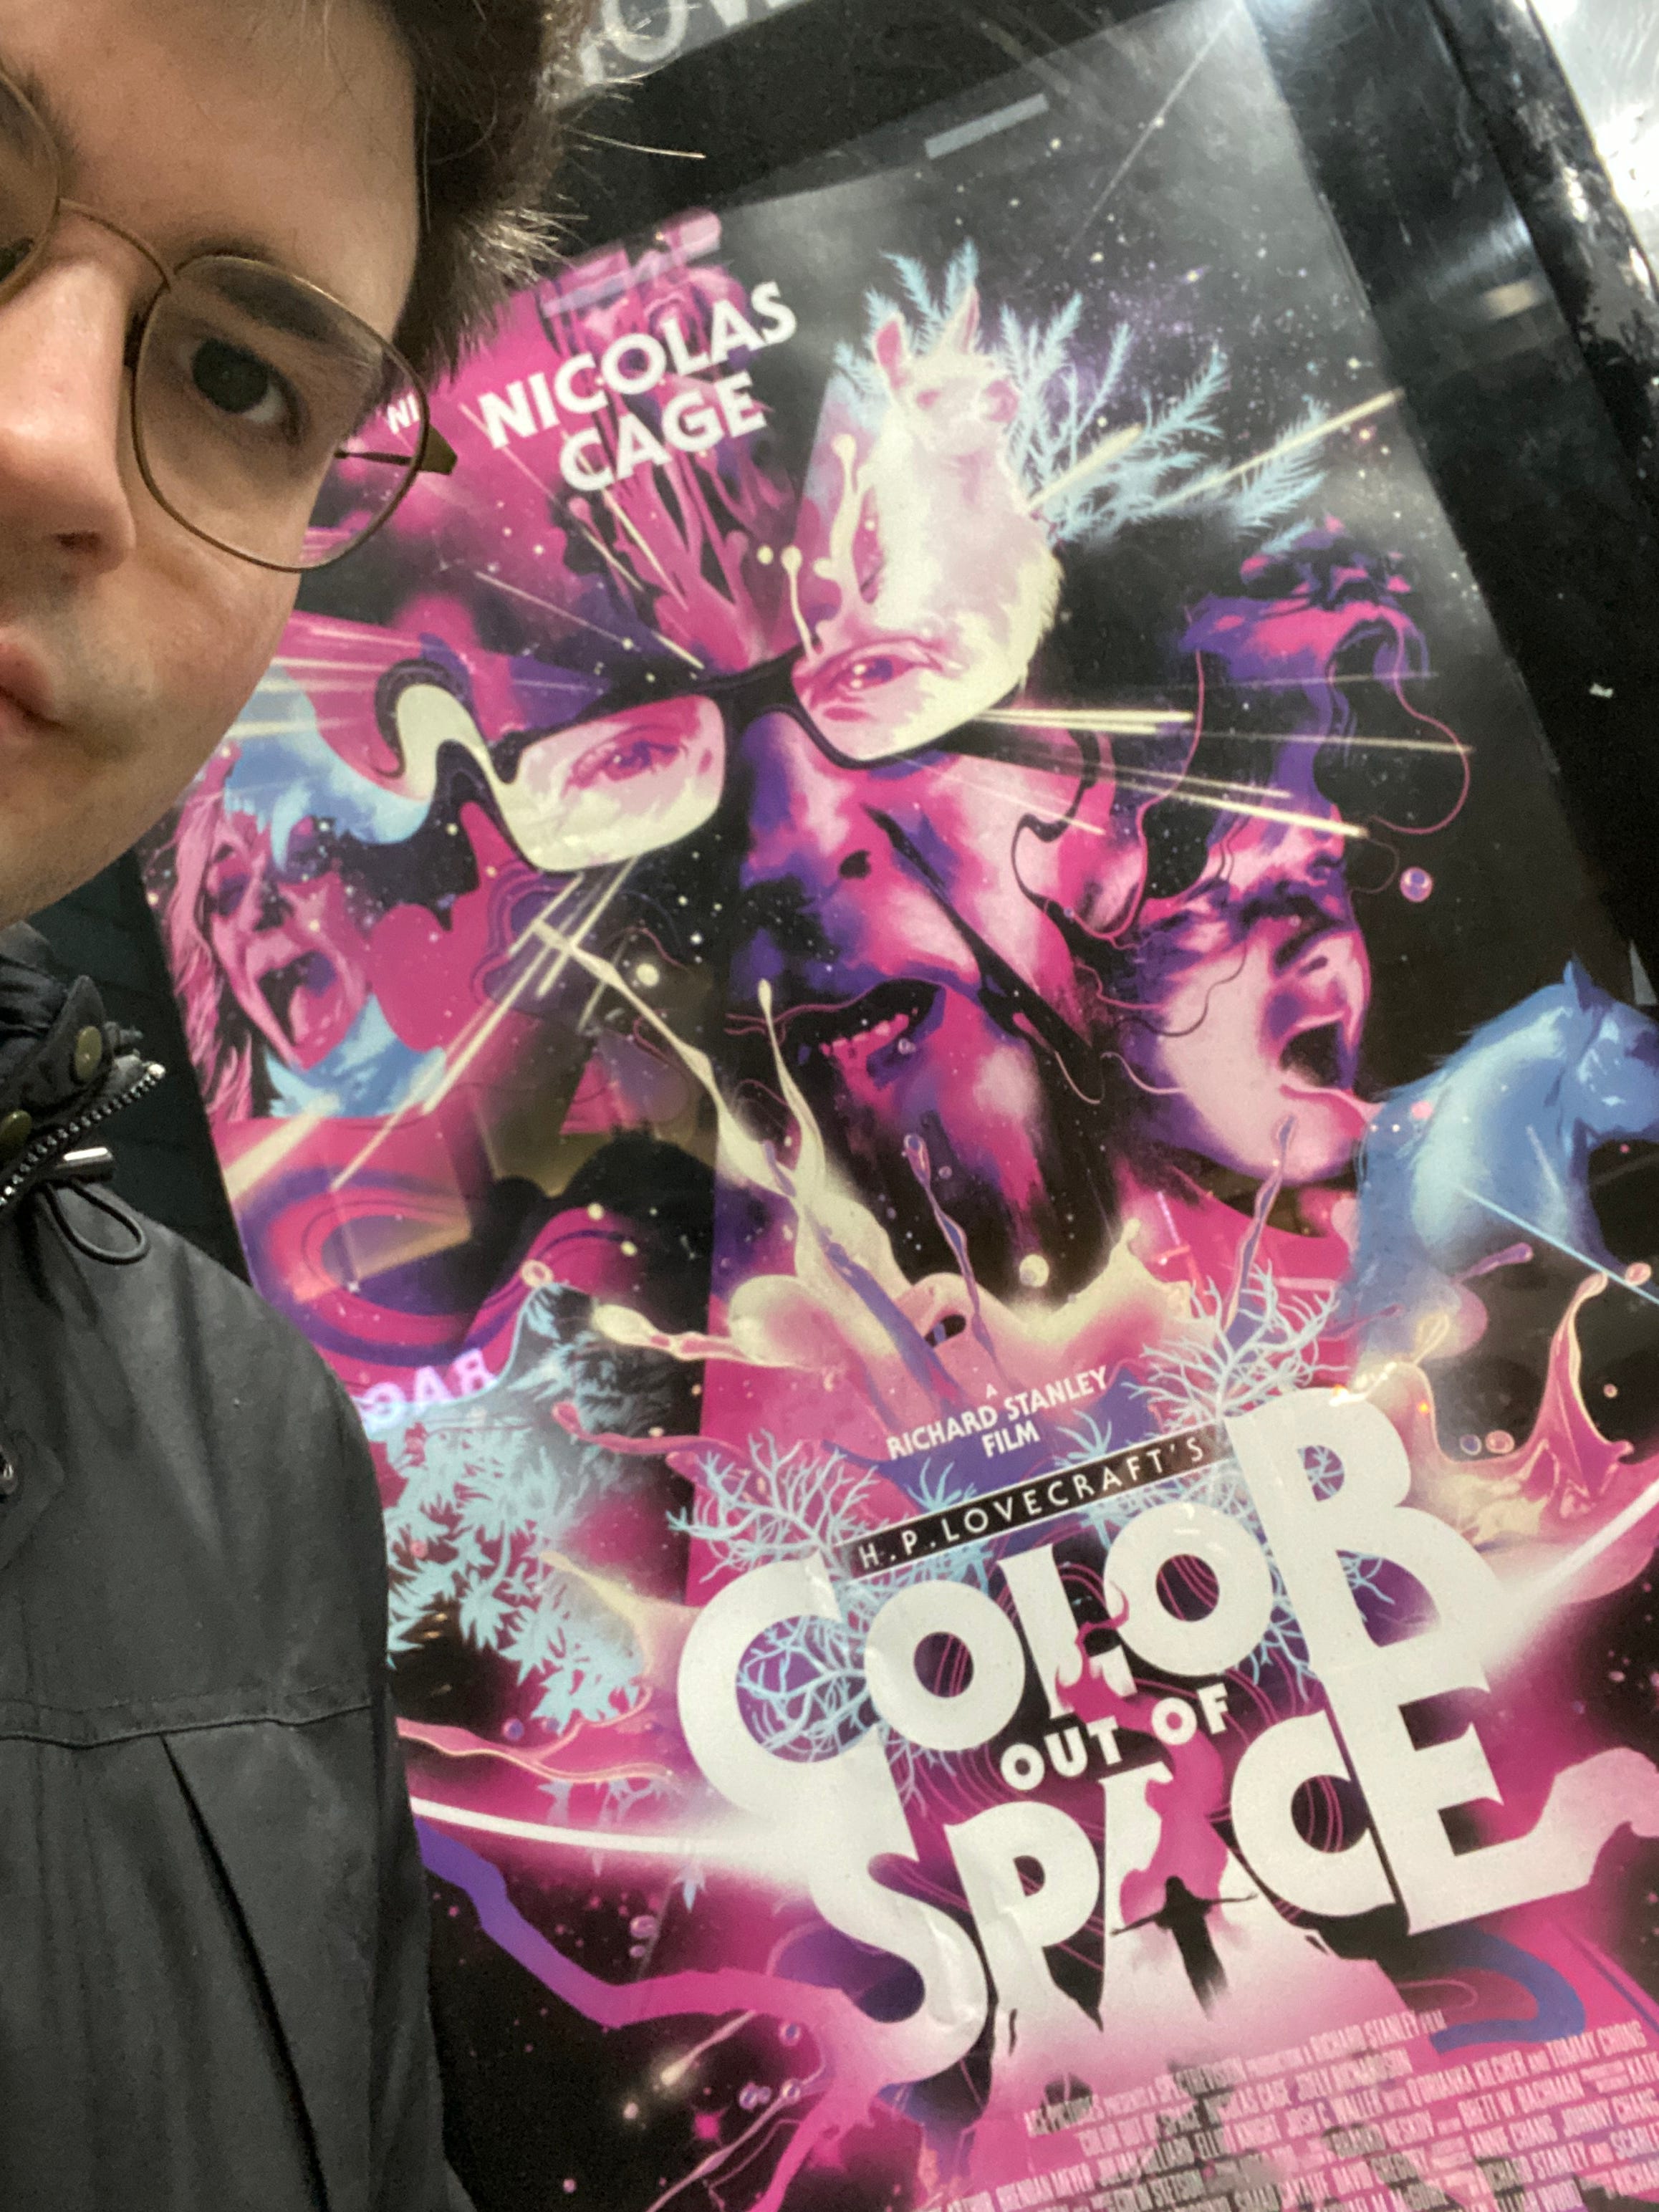 A selfie of the author, a young man with glasses, with the film poster for Color out of Space.